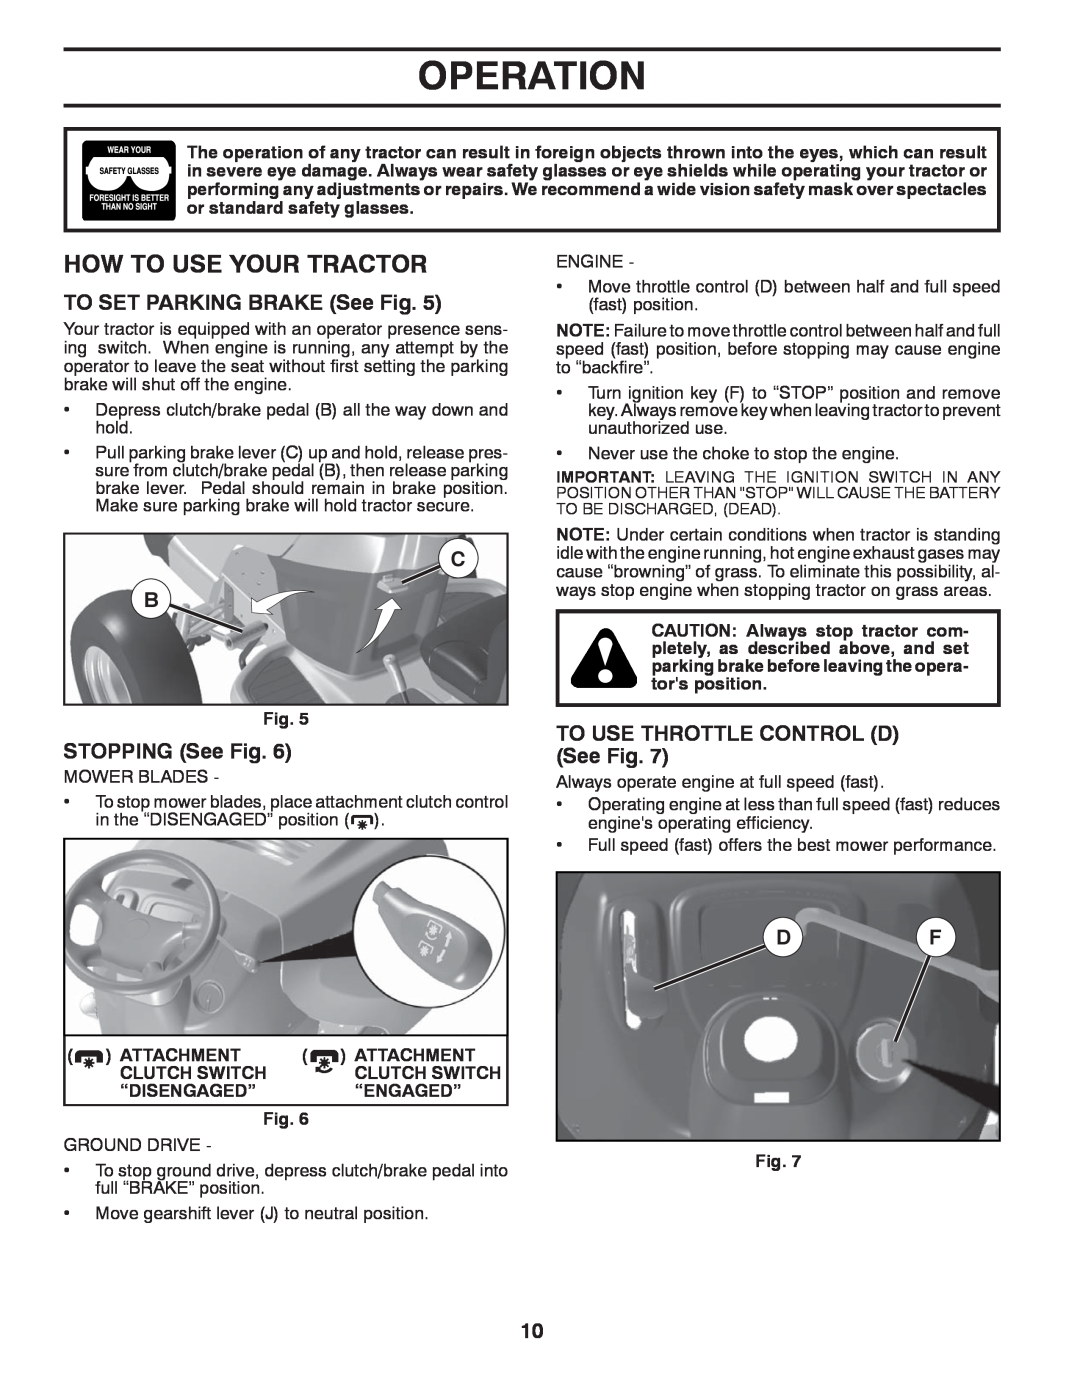 Poulan PXT12530 manual How To Use Your Tractor, Operation, TO SET PARKING BRAKE See Fig, STOPPING See Fig 